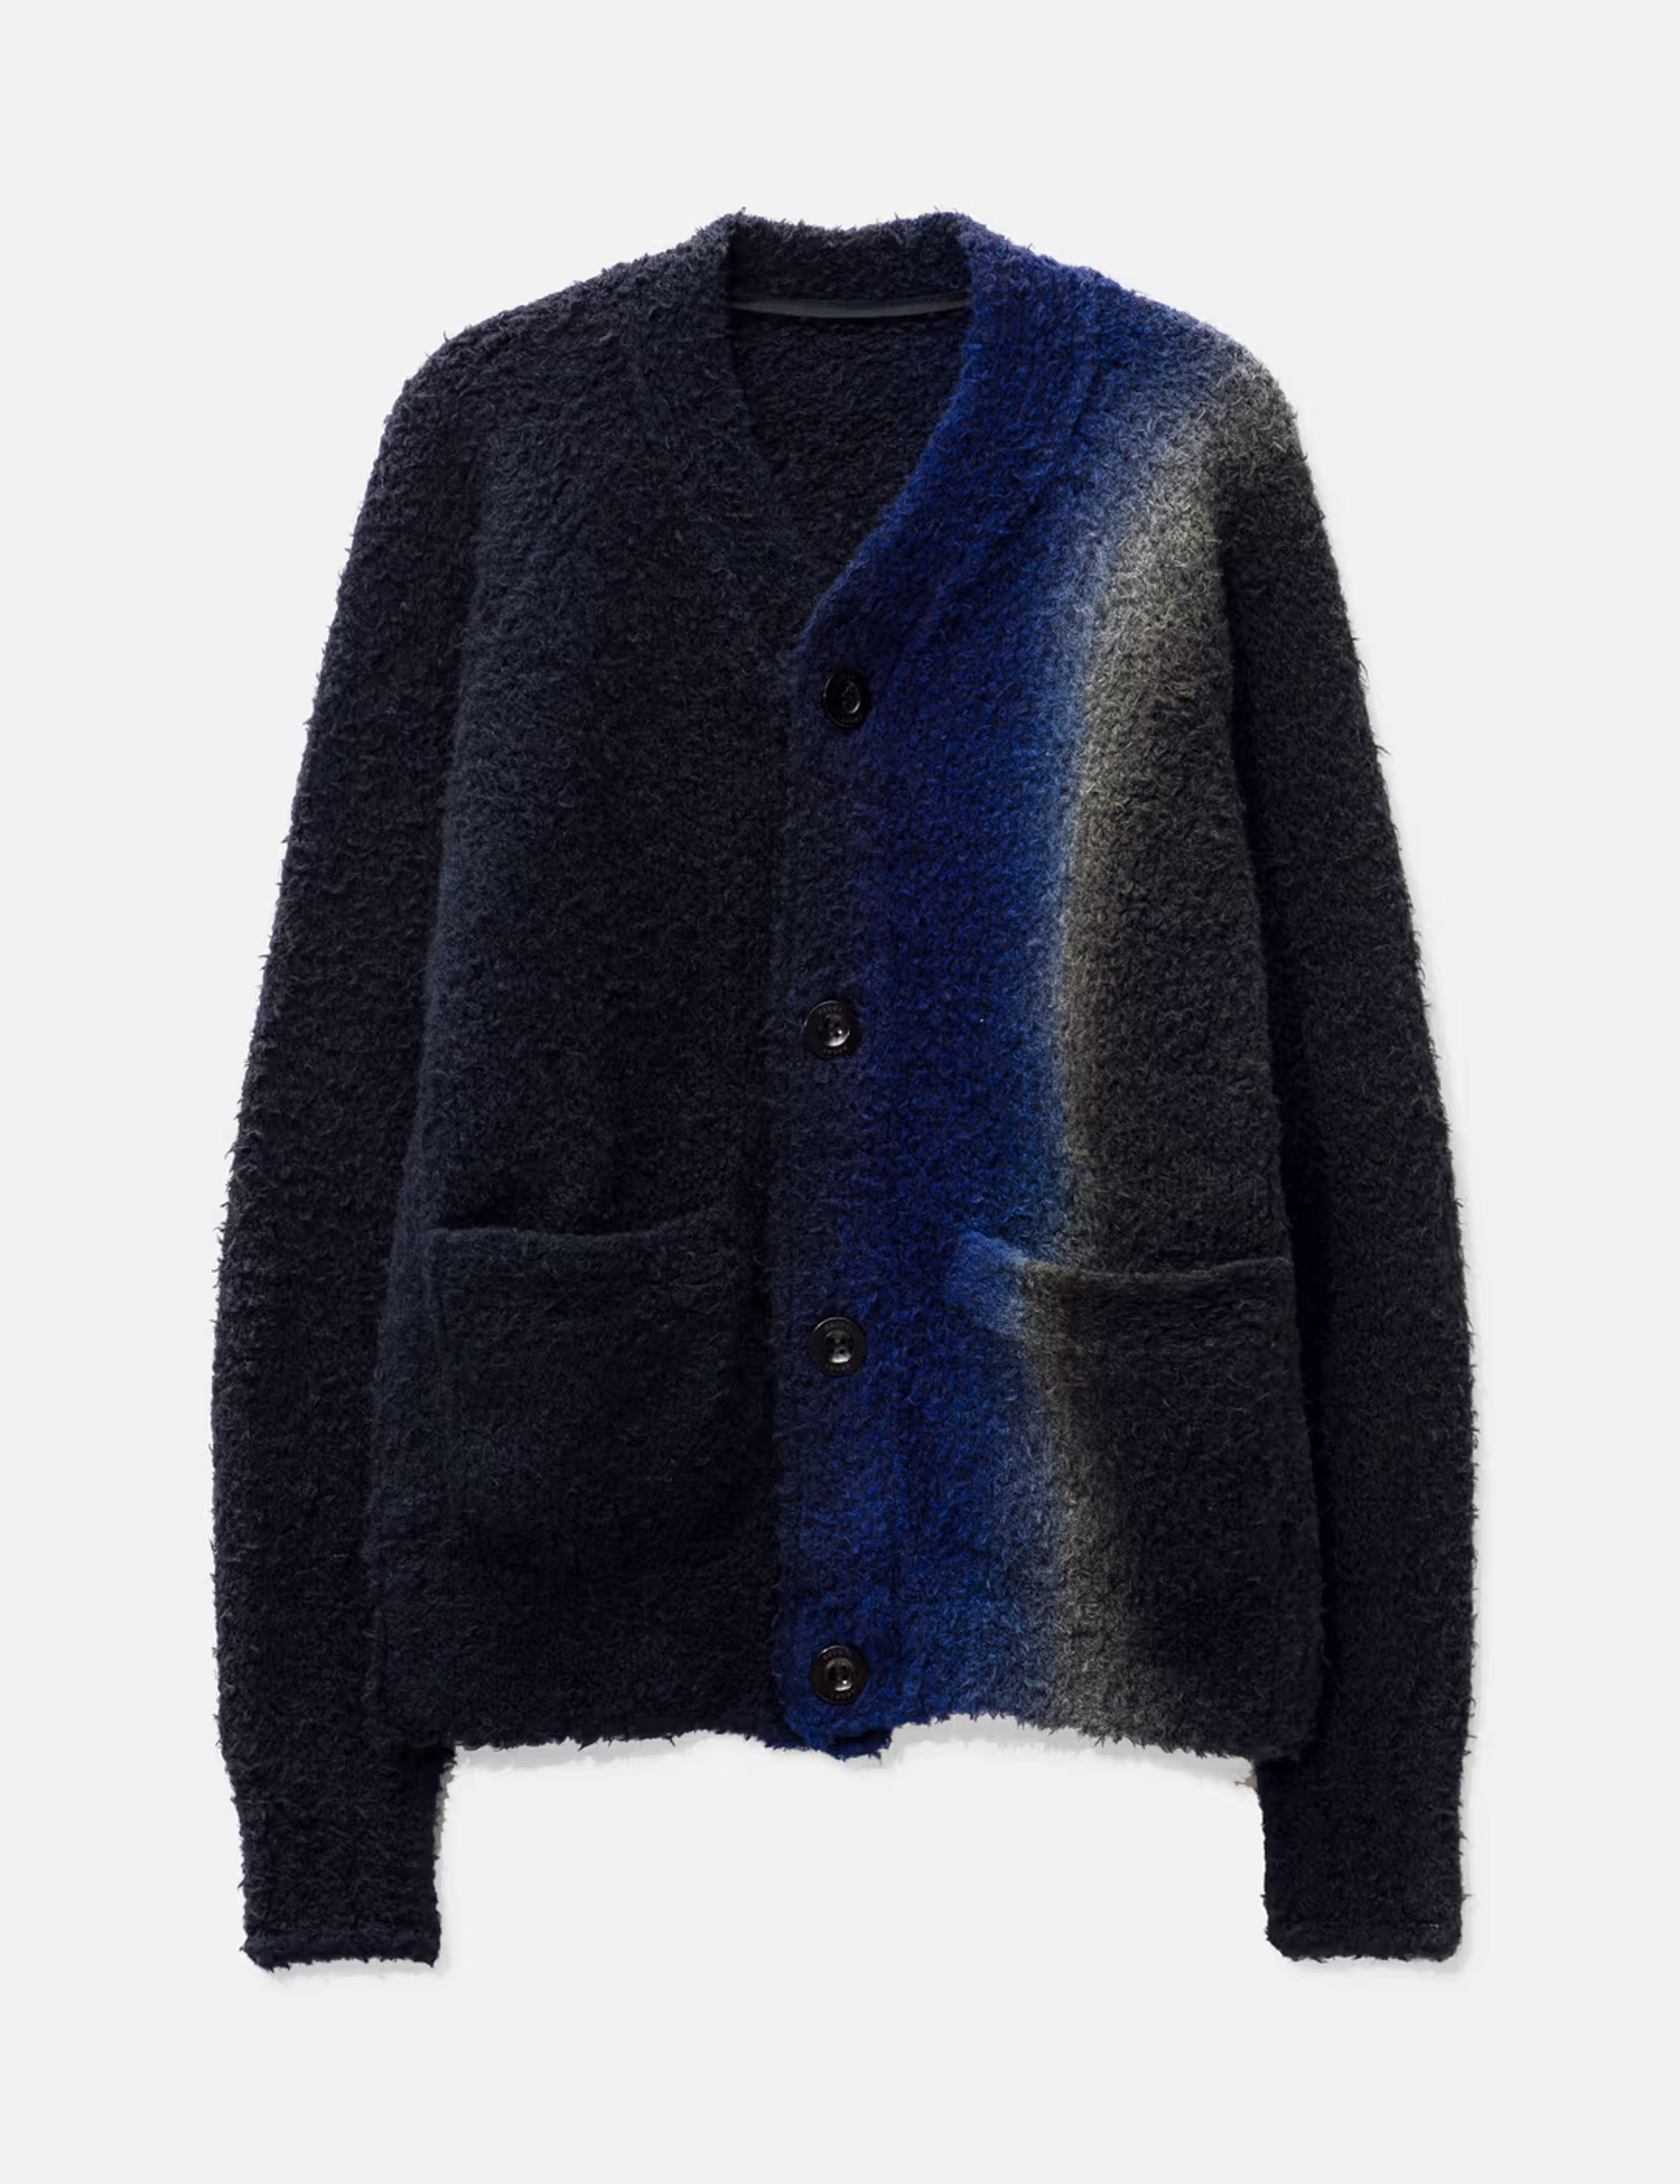 Sacai - Tie Dye Knit Cardigan | HBX - Globally Curated Fashion and Lifestyle by Hypebeast